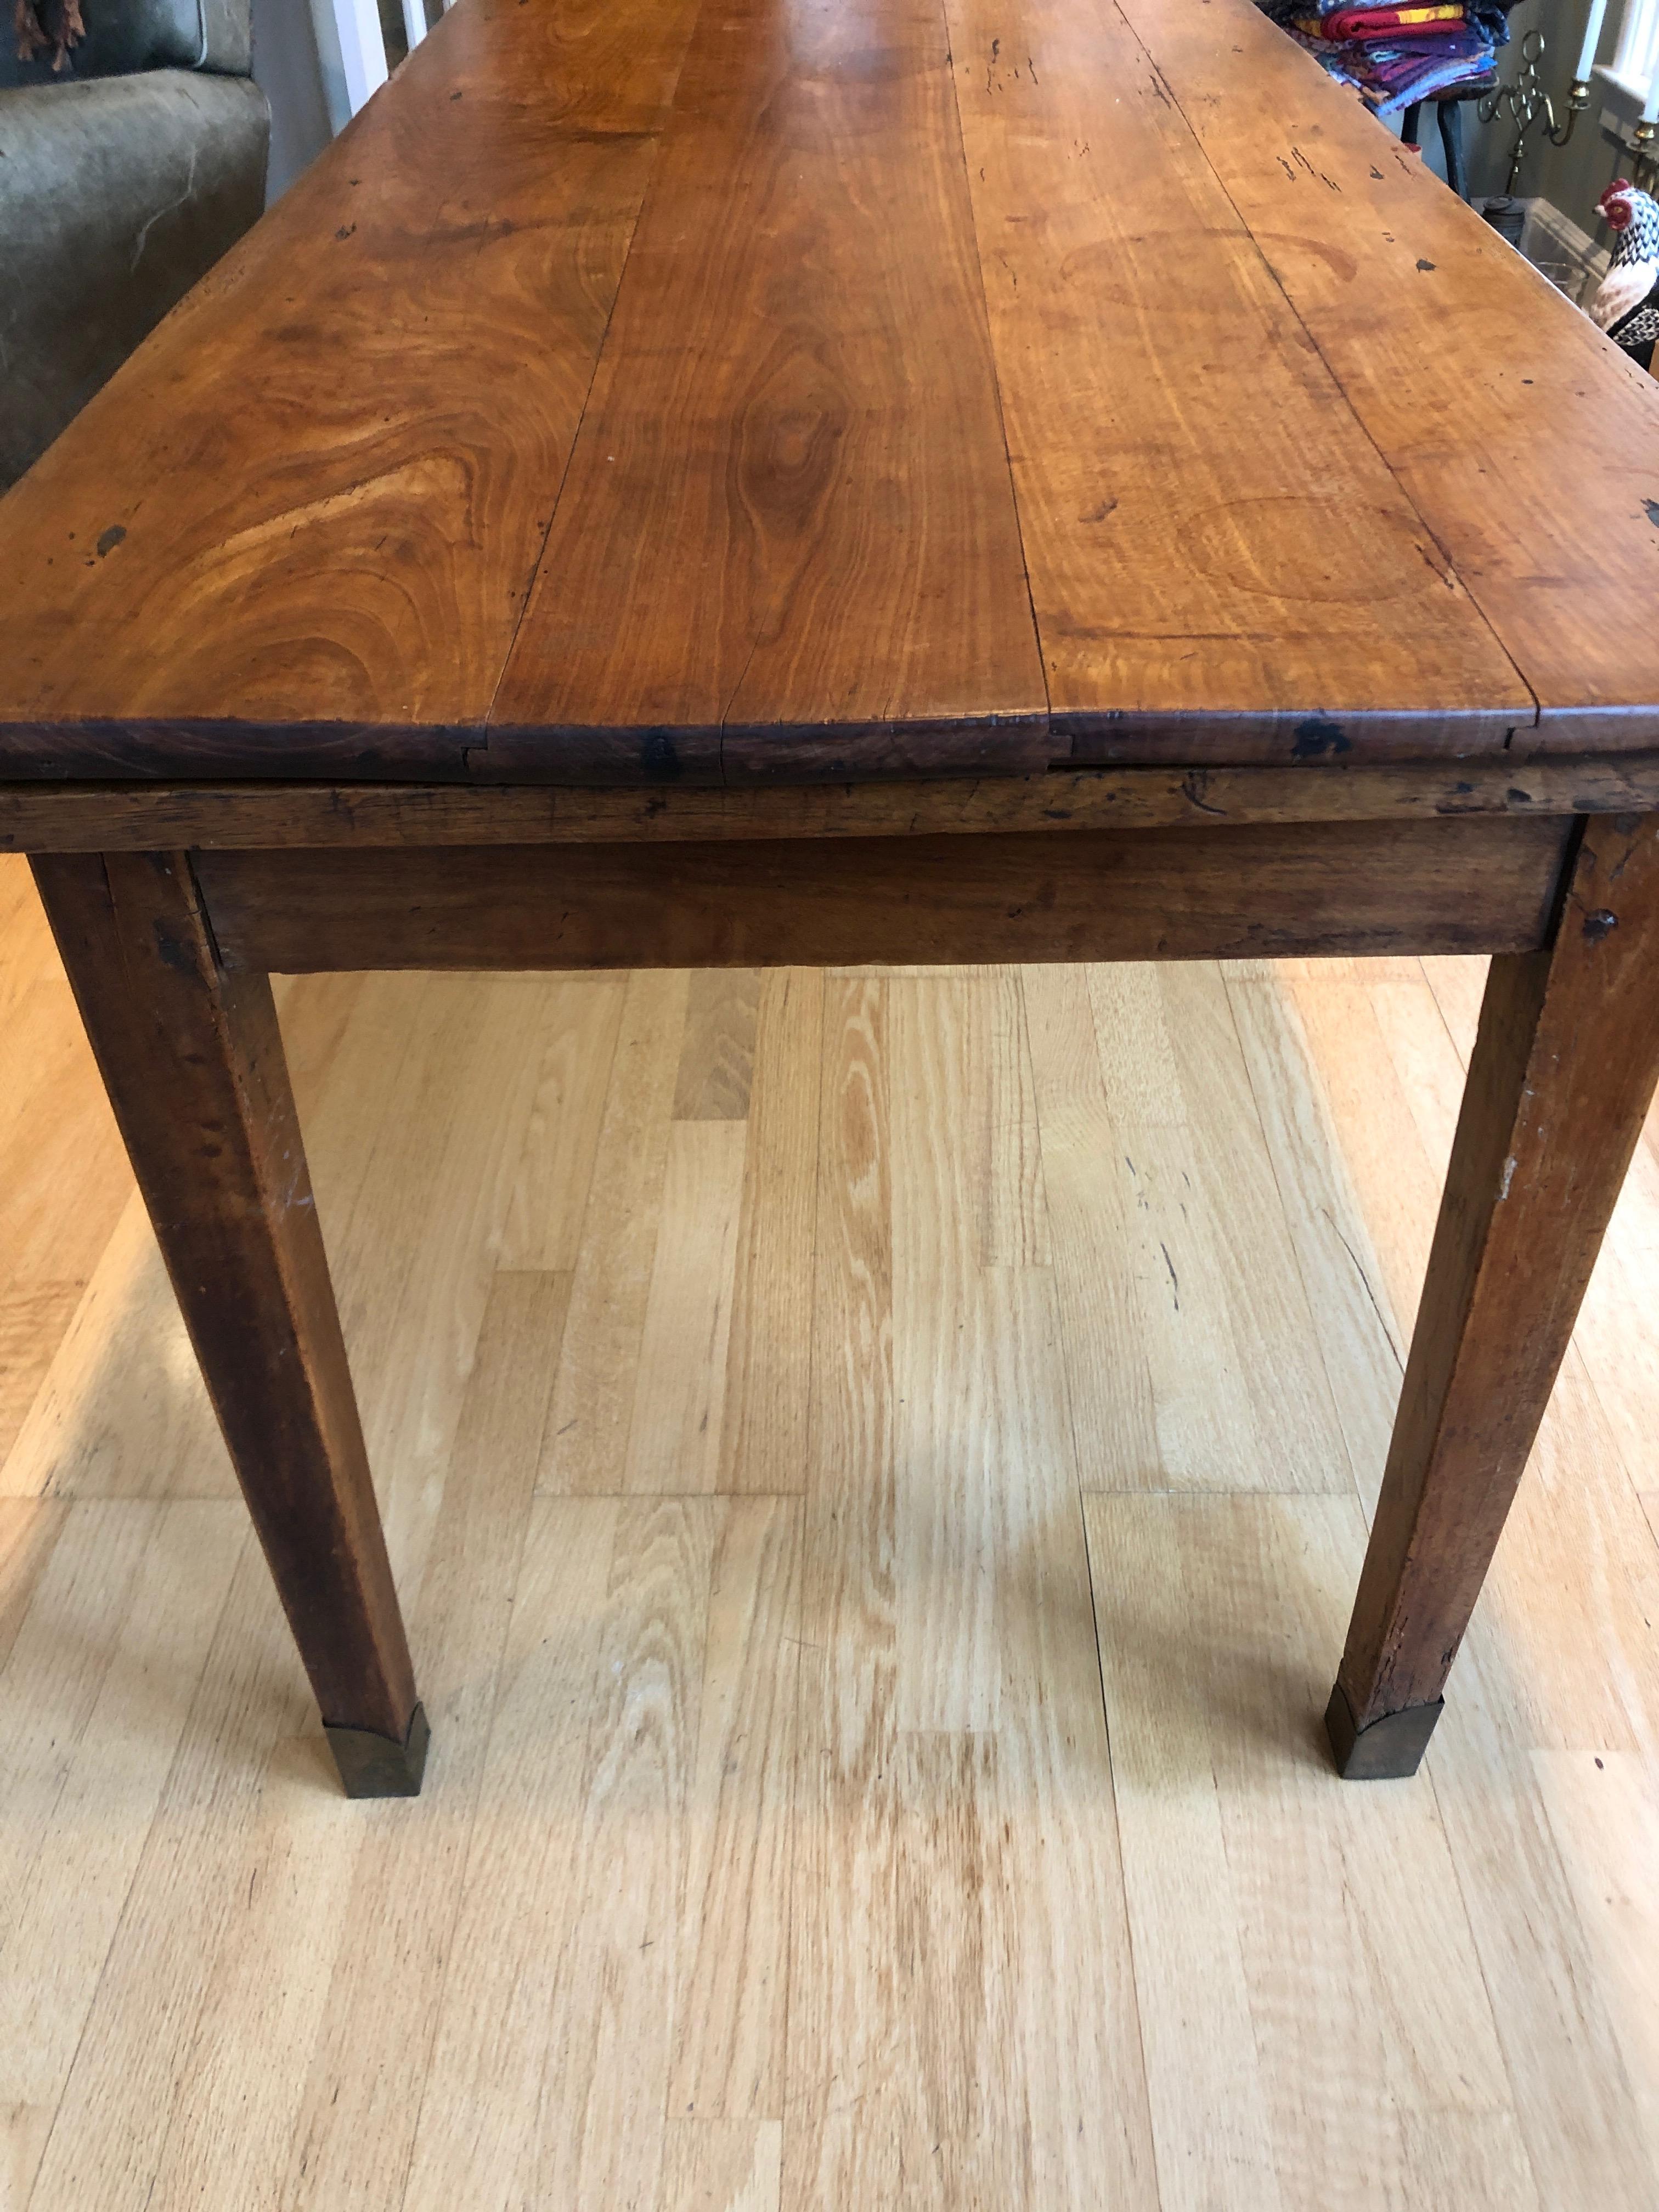 Warm and Friendly 19th Century Elegant Country Cherry Farm Table 1